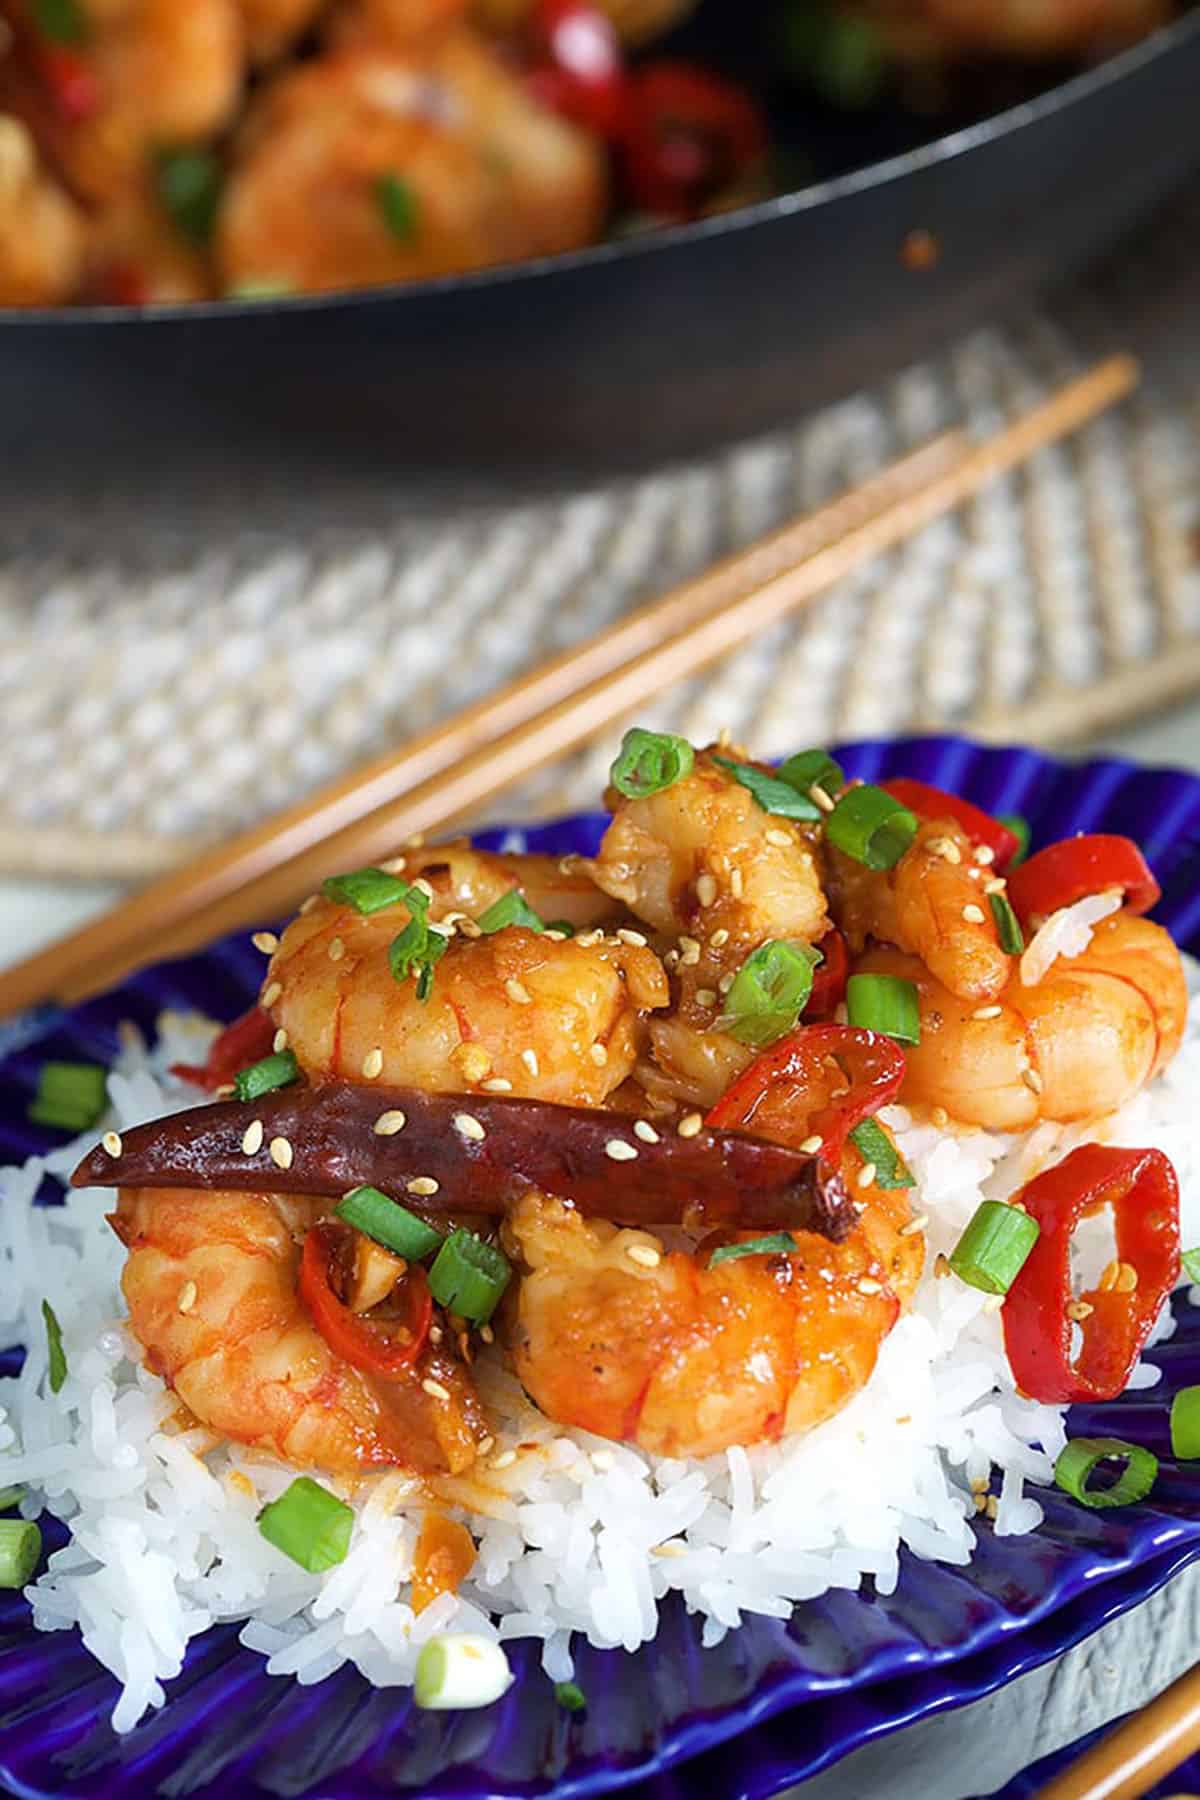 Shrimp is garnished with chopped green onions and sesame seeds.